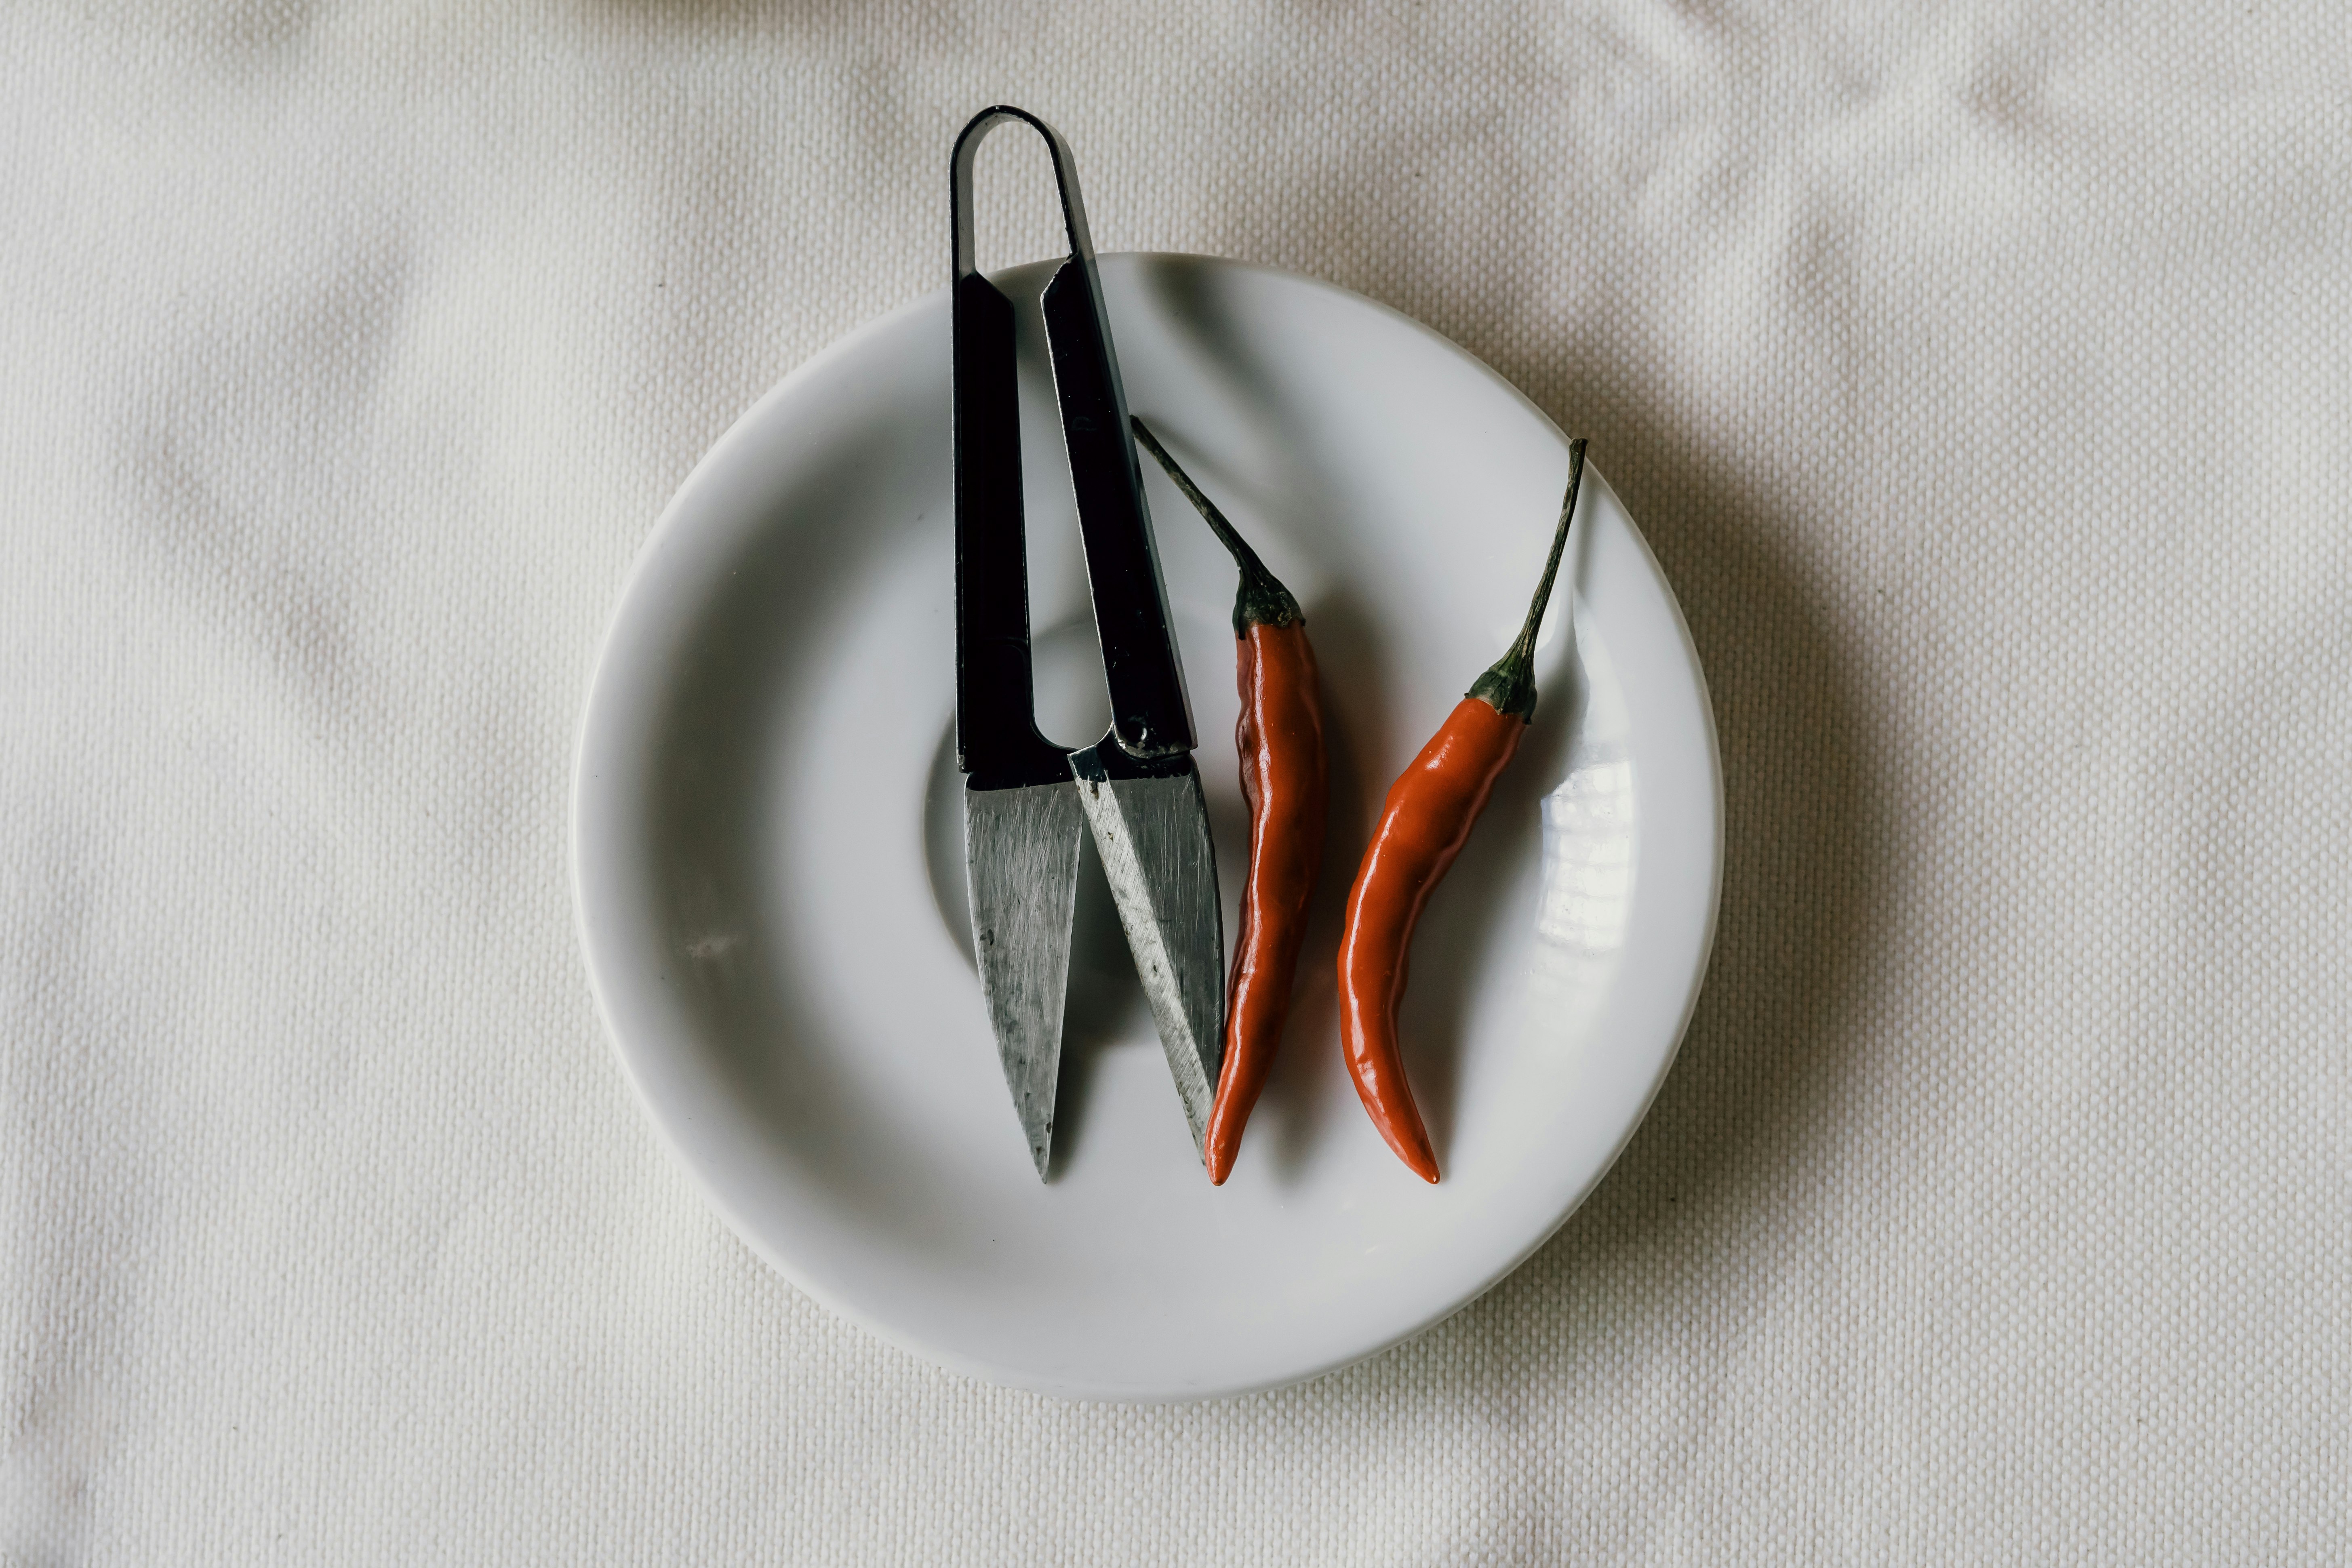 stainless steel fork and bread knife on white ceramic plate